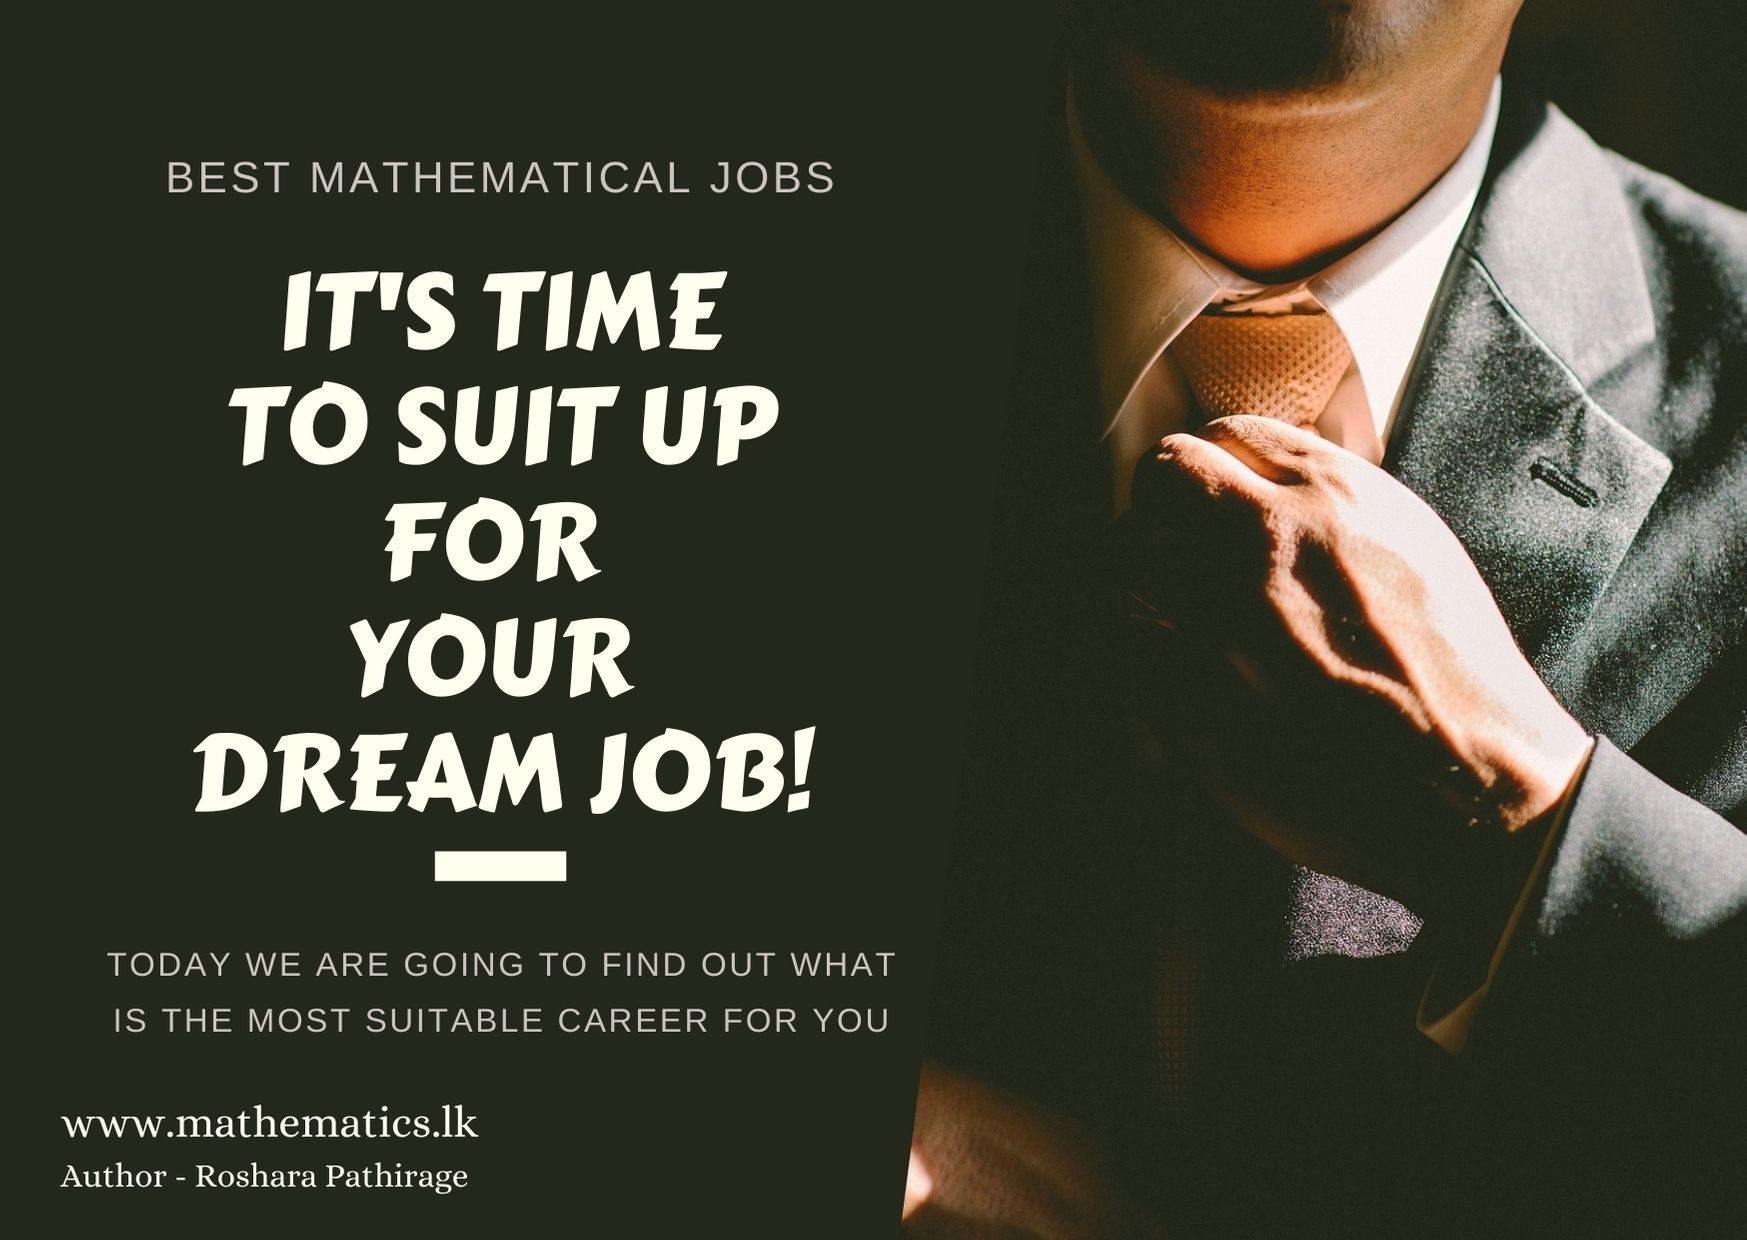 What are the best Mathematical jobs in Sri Lanka